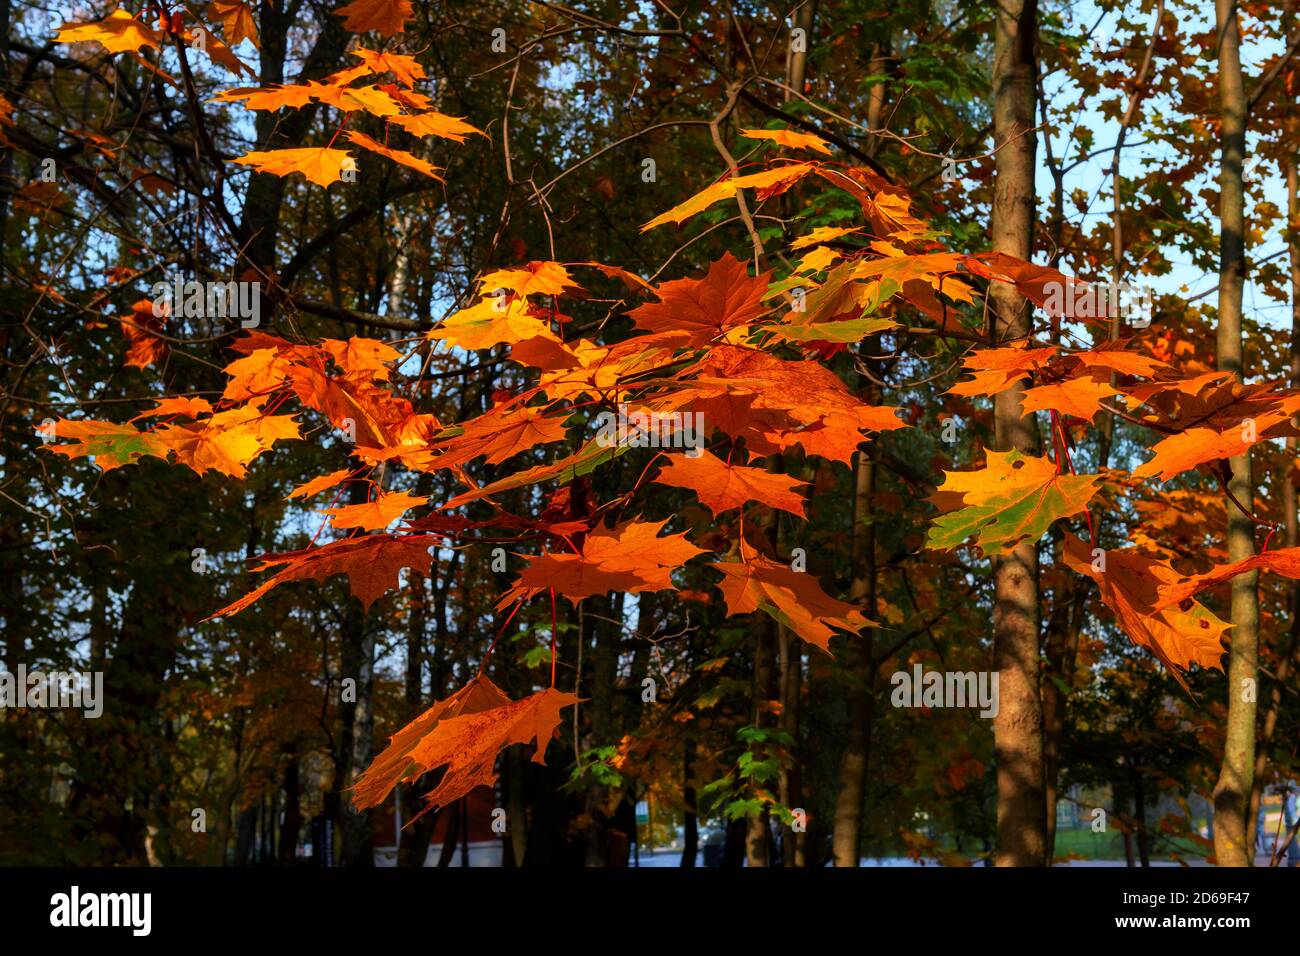 Maple Tree Branch With Colored Leaves In Autumn Forest Stock Photo Alamy